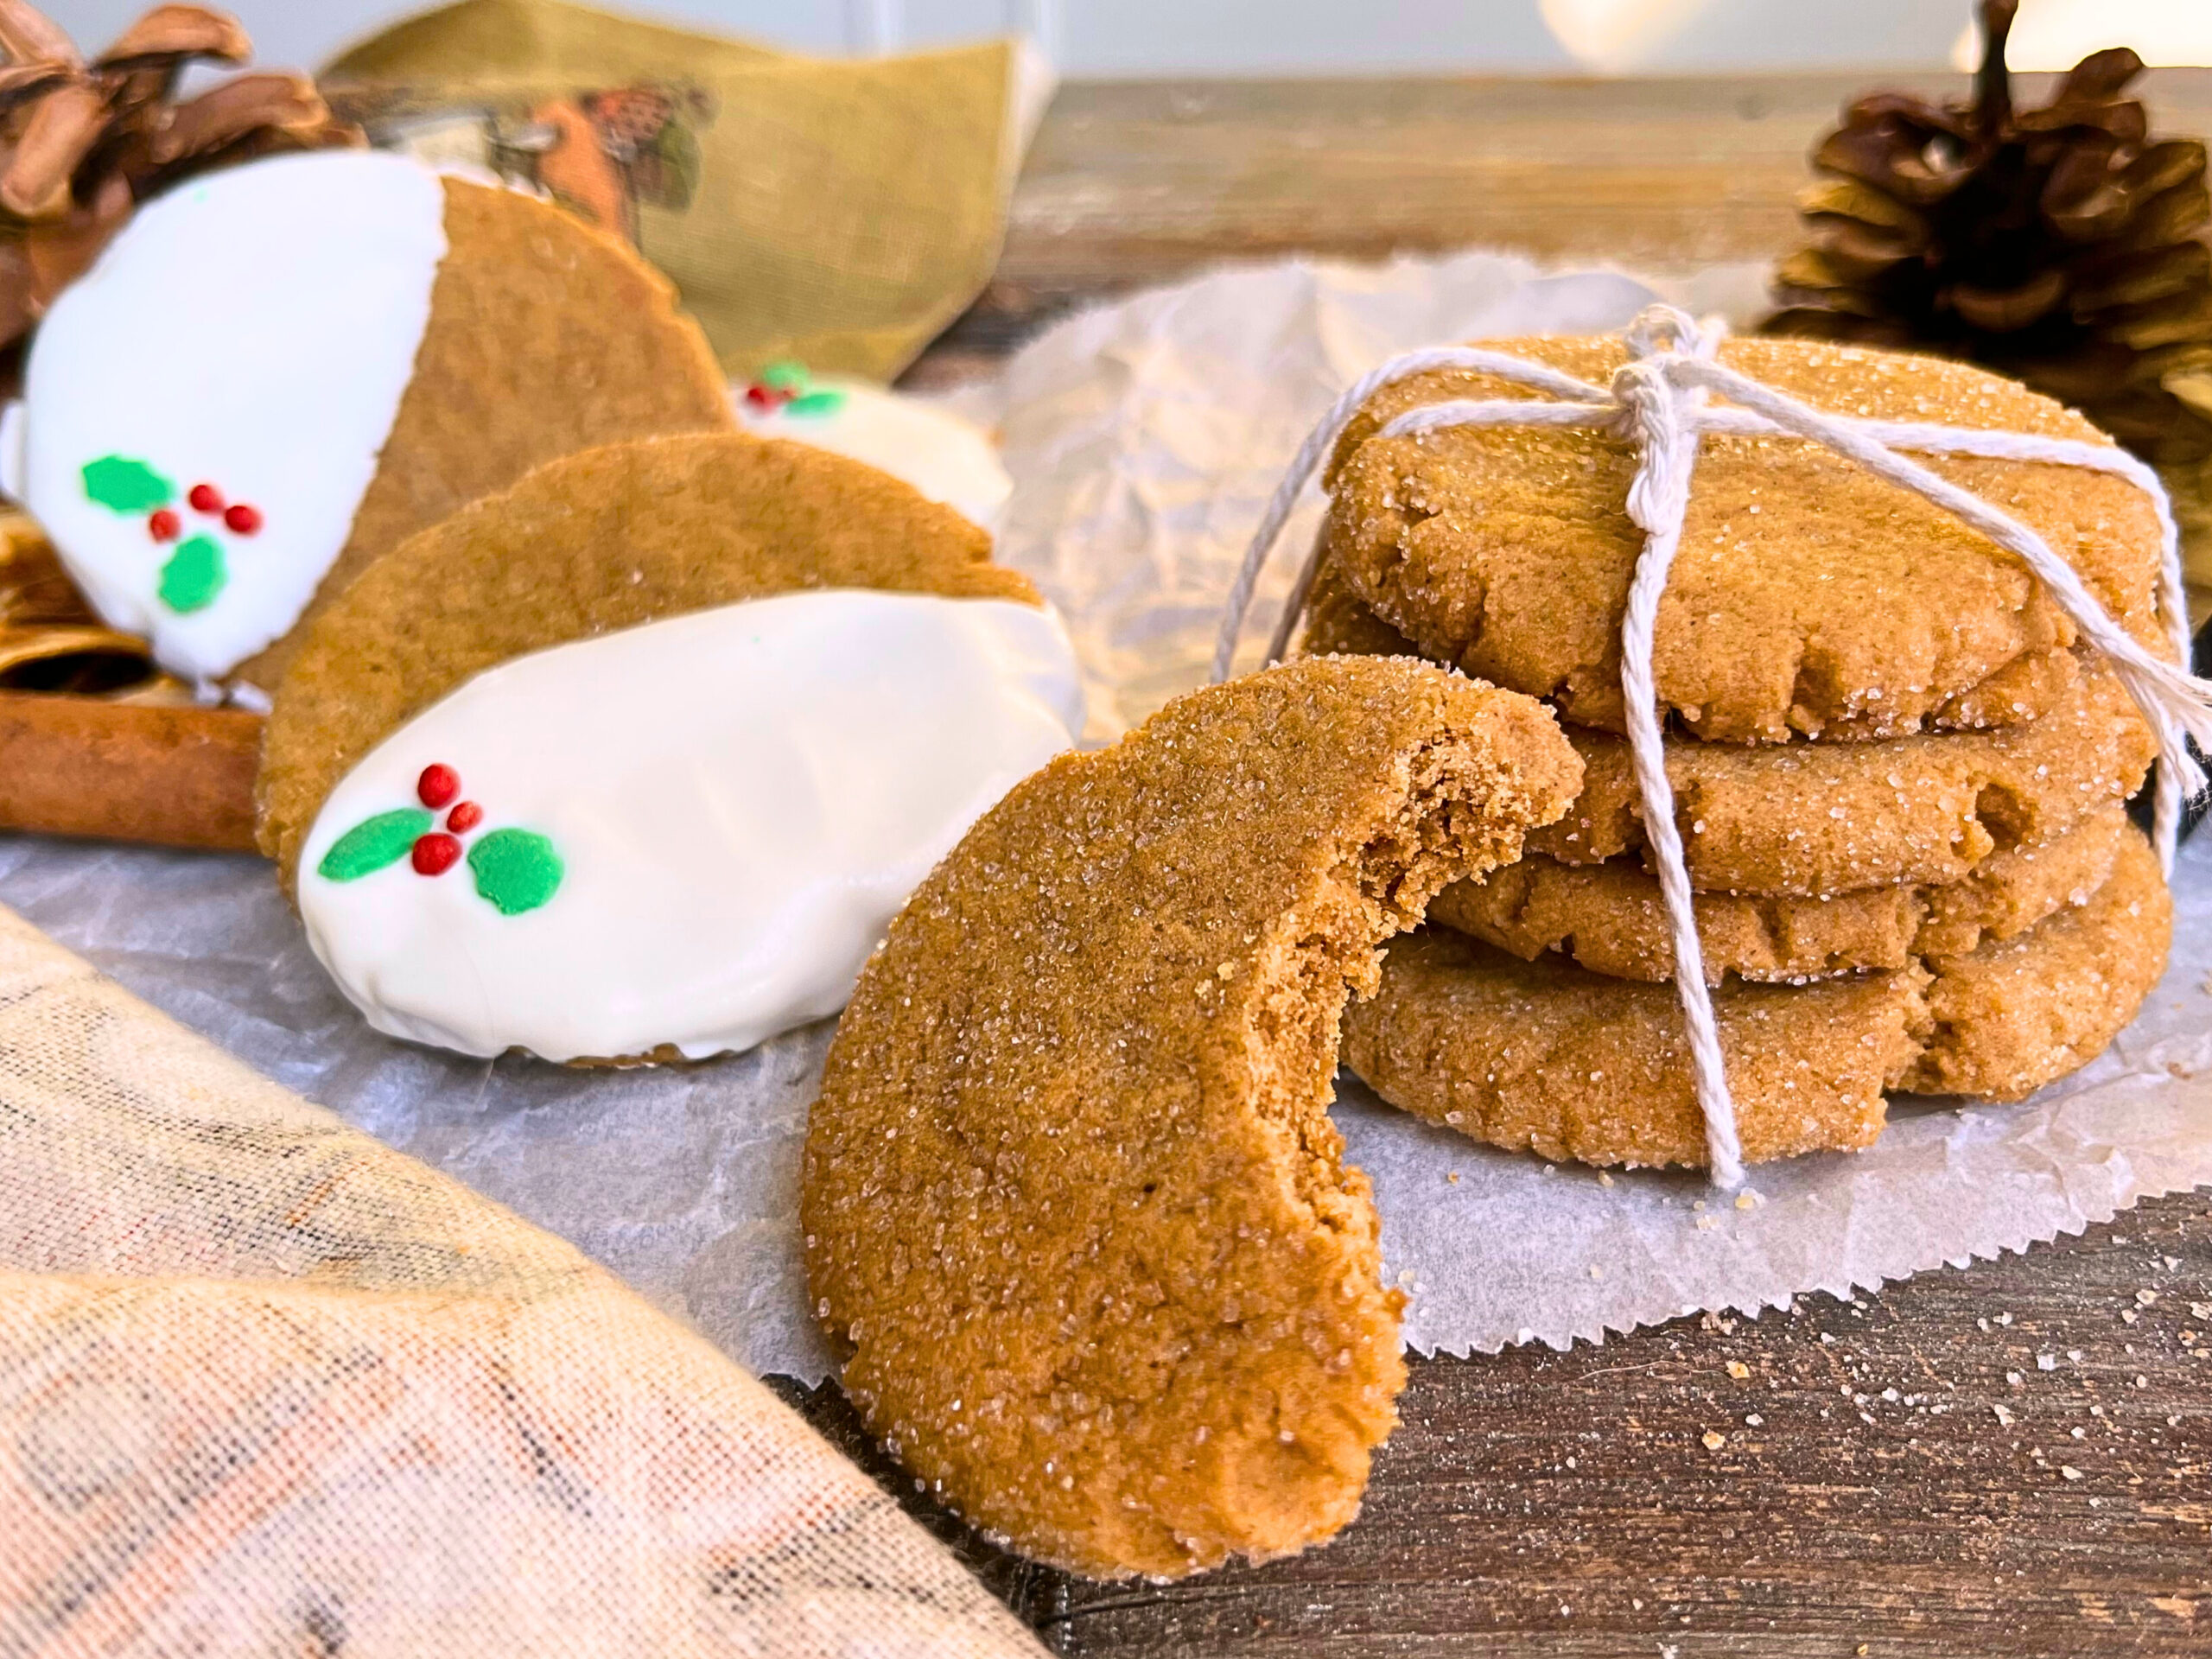 Gingerbread cookies sitting on top of a pieces of parchment paper on a wooden table. Some cookies are decorated with white chocolate and Christmas sprinkles, others are stacked and tied with kitchen twine. One has a bite out of it.